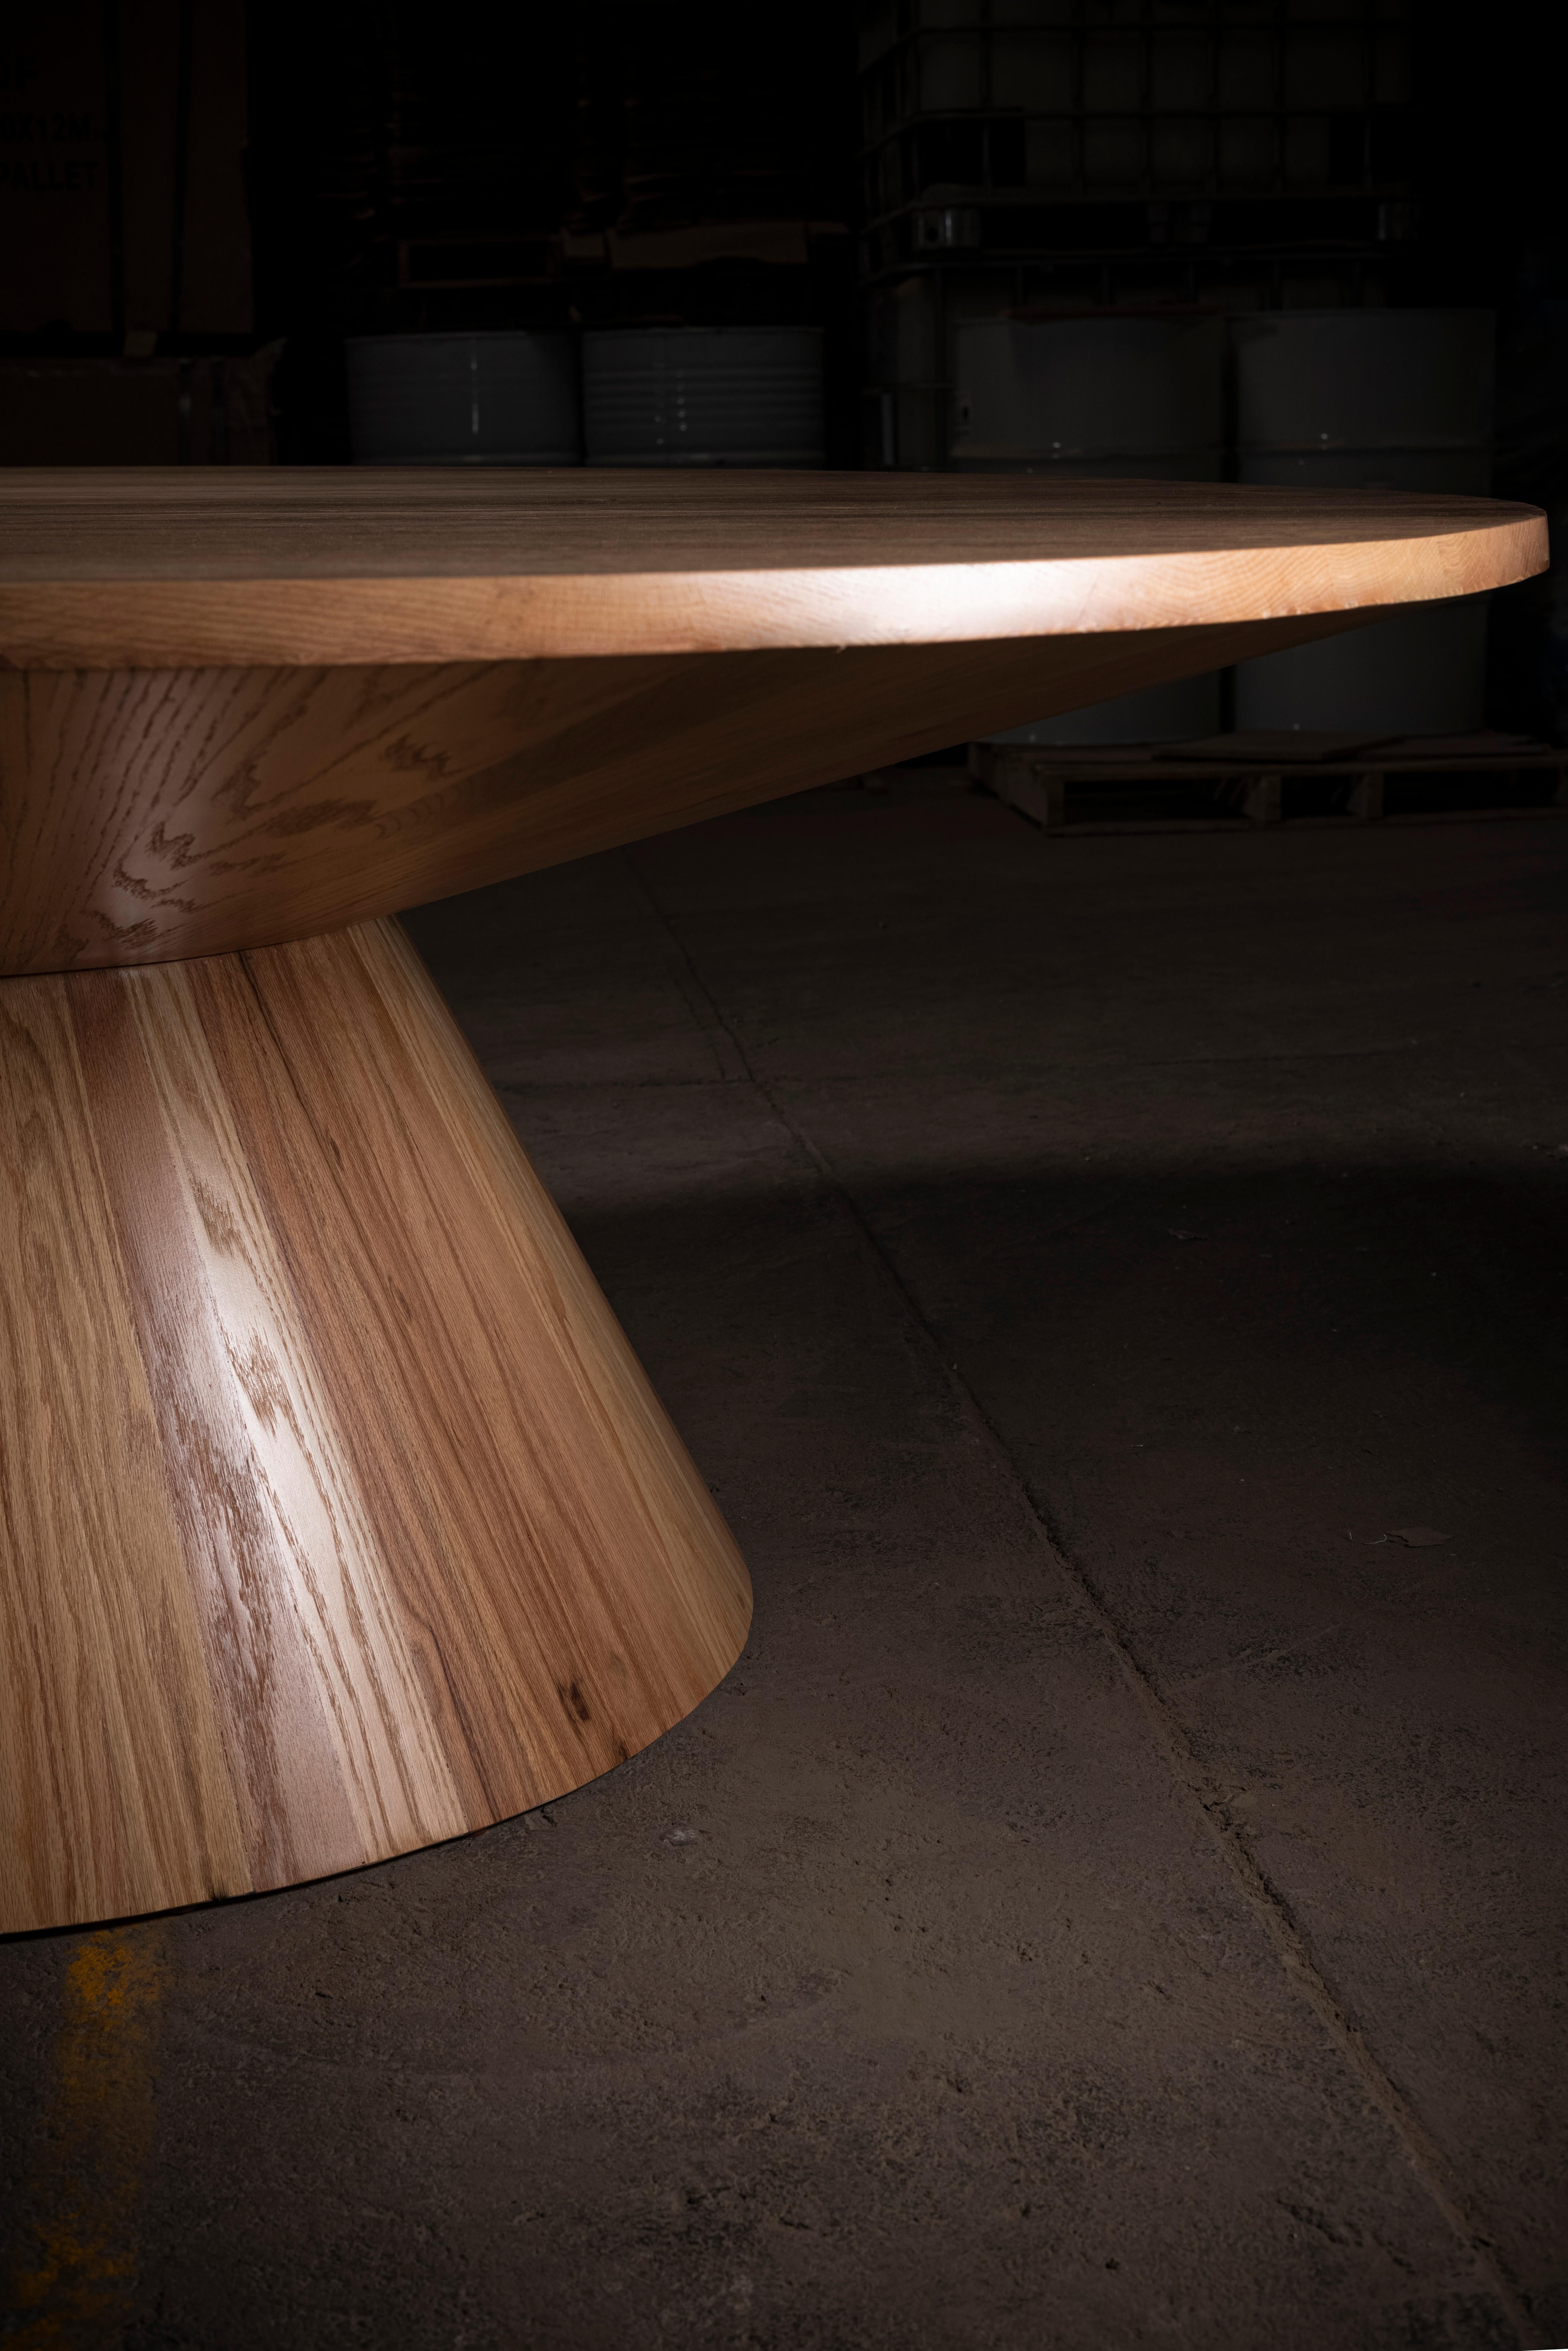 Handcrafted solid oak circular dining table.
Circular piramid shape pedestal.
Natural oak look with a coat of clear laquer for protection.